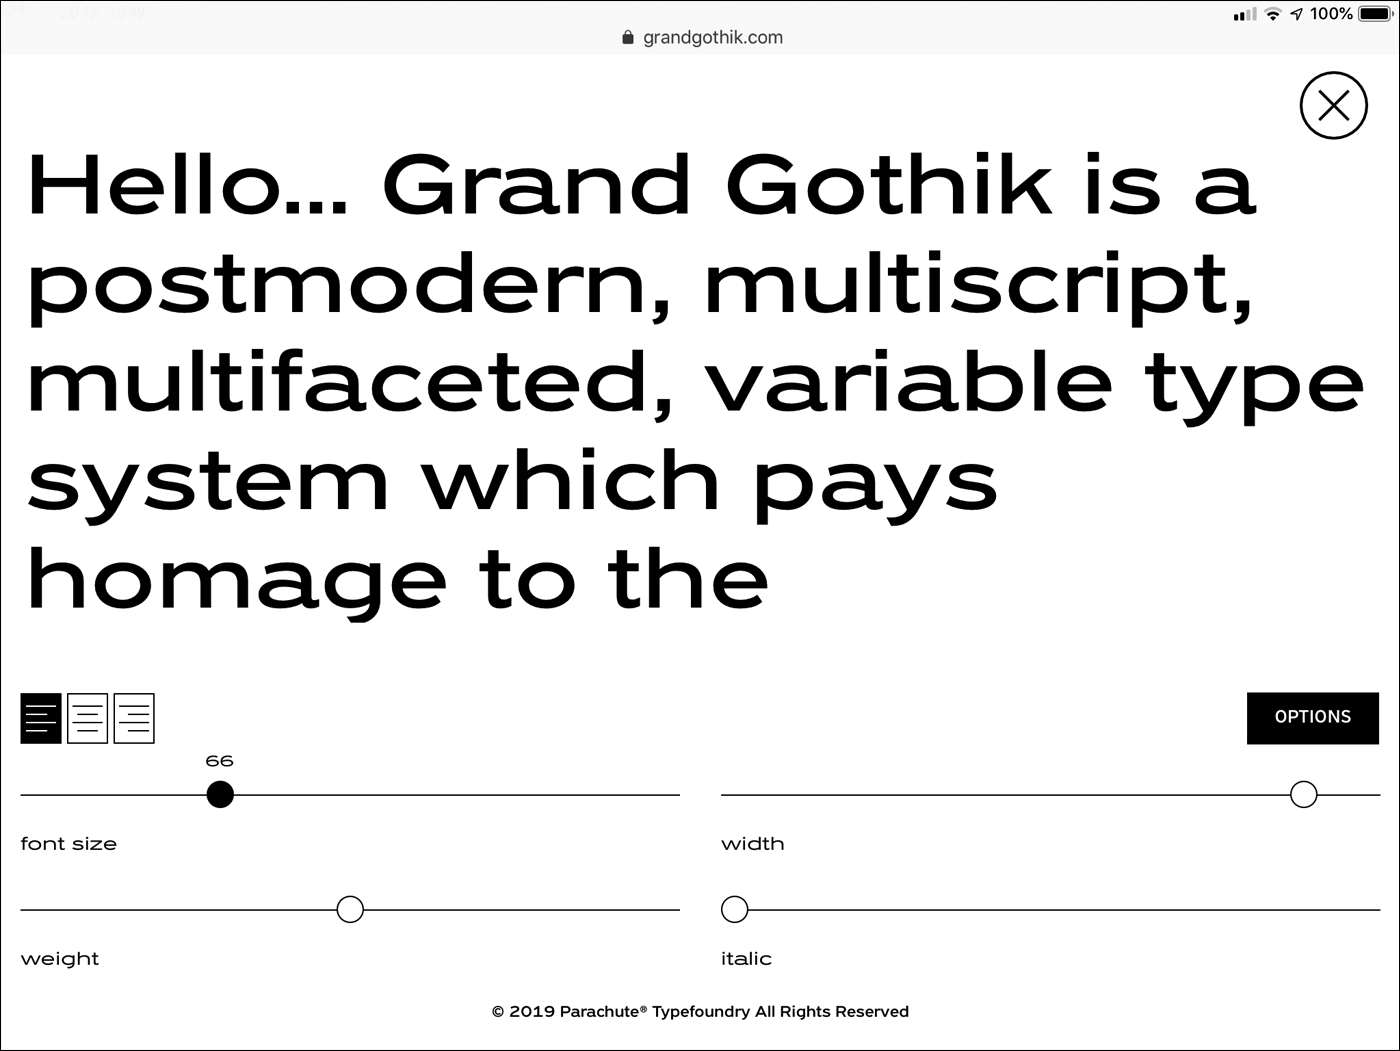 Typeface font grotesque gothic variable sans serif corporate multiscript postmodern